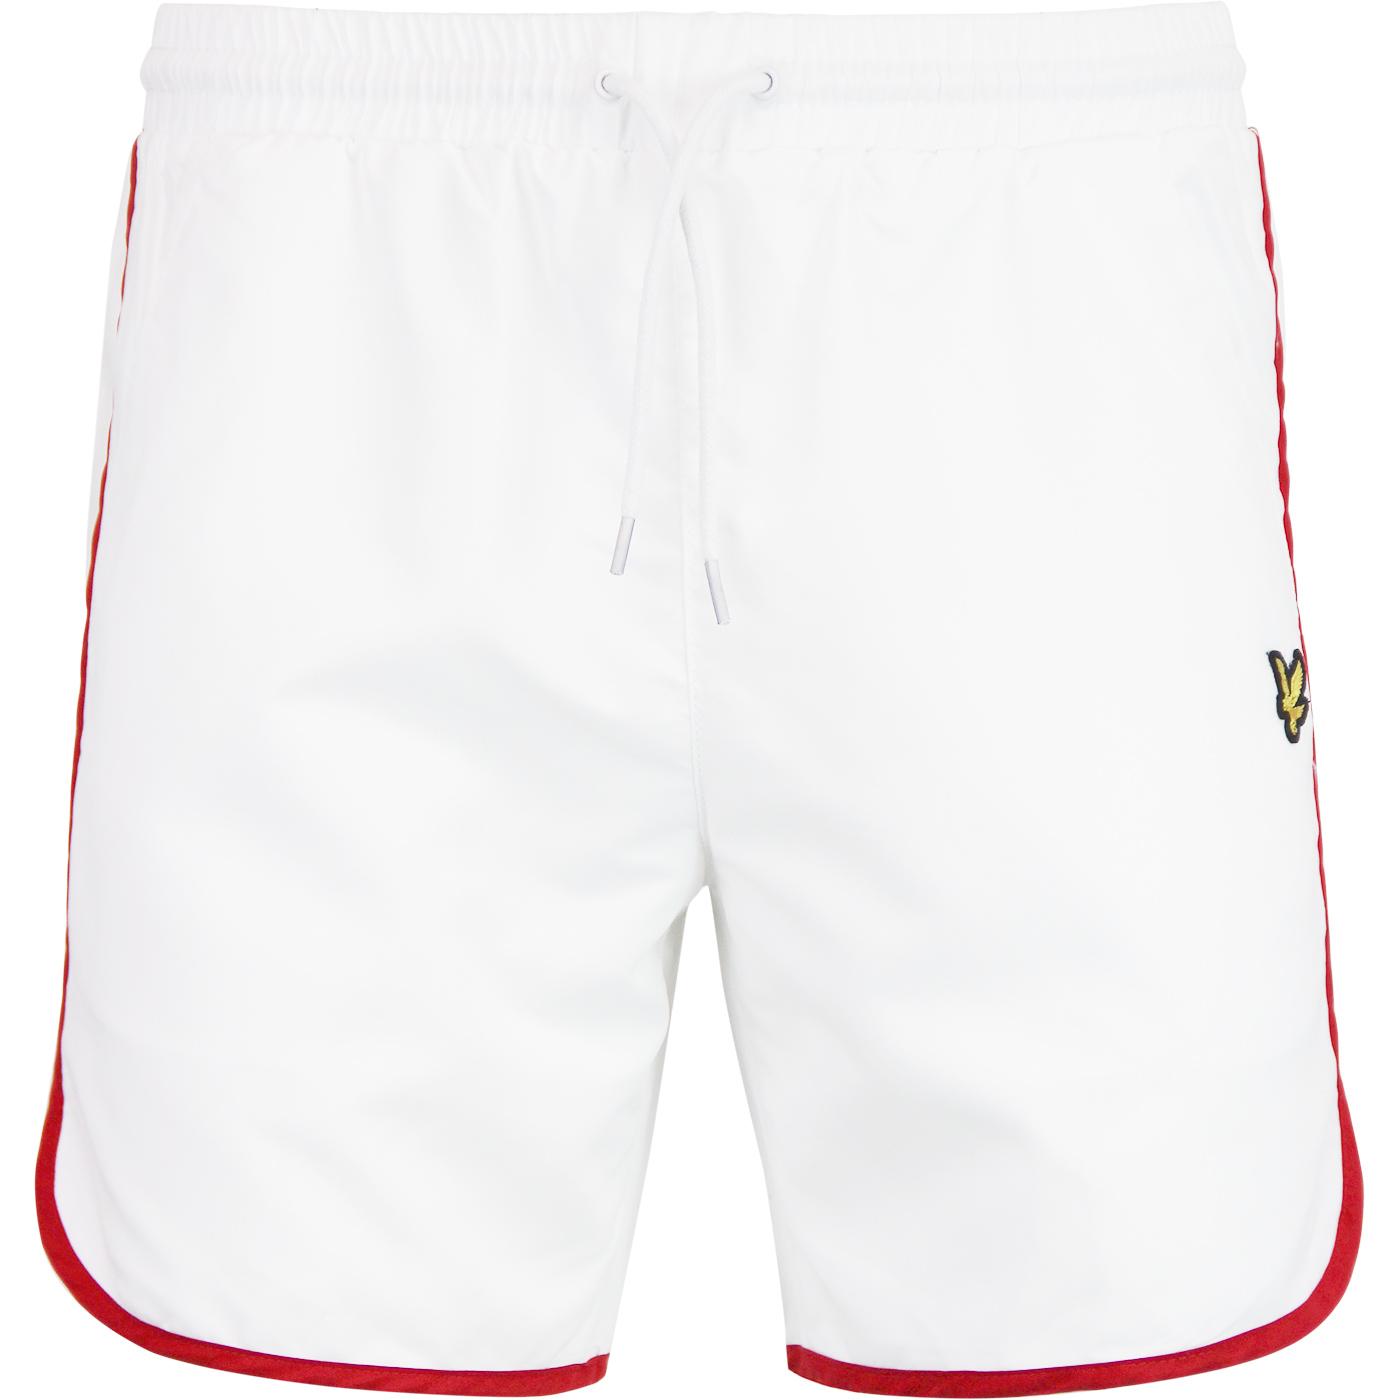 LYLE & SCOTT Retro Indie Piping Detail Shorts in White.